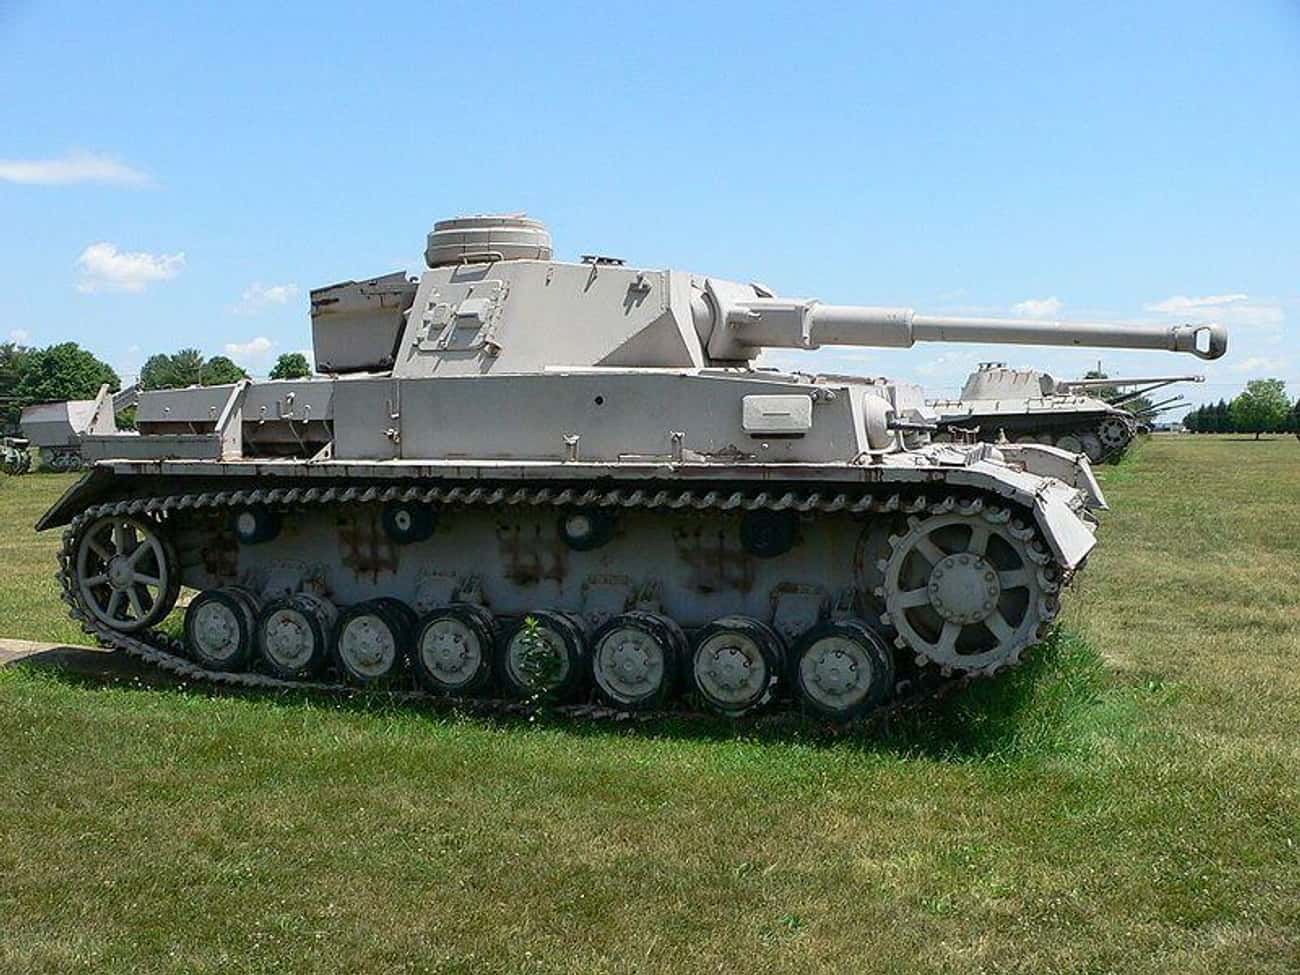 Panzer IV (Germany) - The Wehrmacht's Workhorse